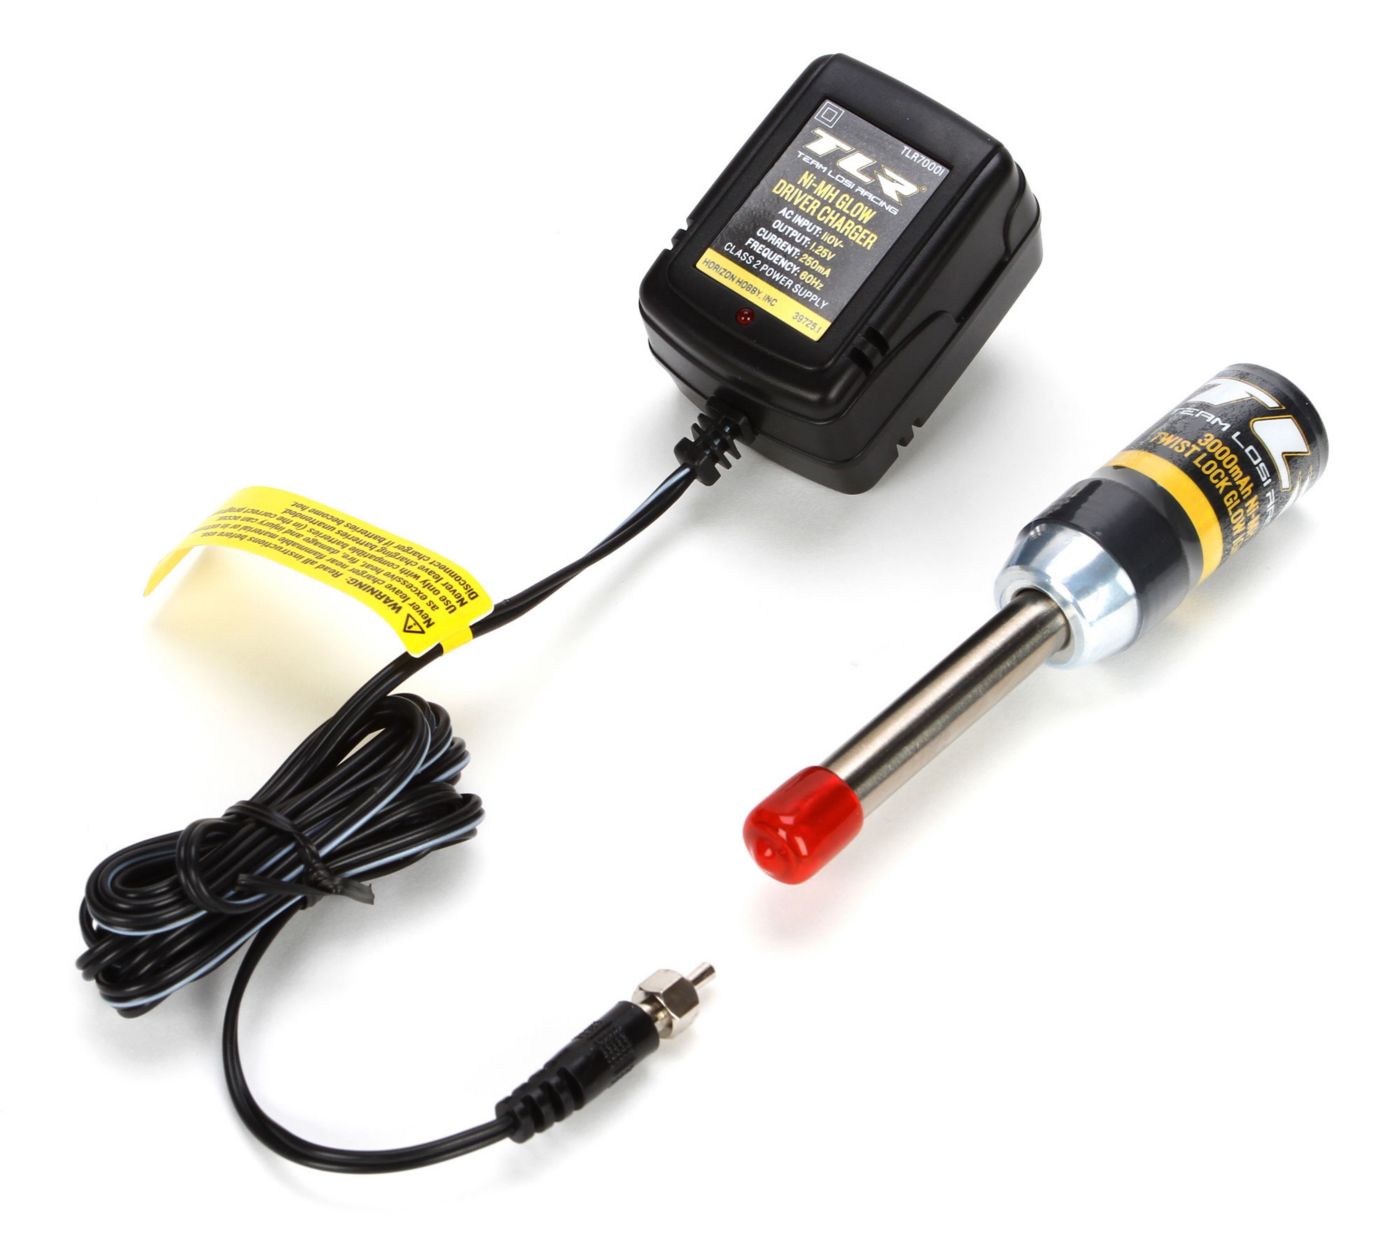 Losi Racing Twist Lock Glow Igniter and Charger Combo (TLR70001)